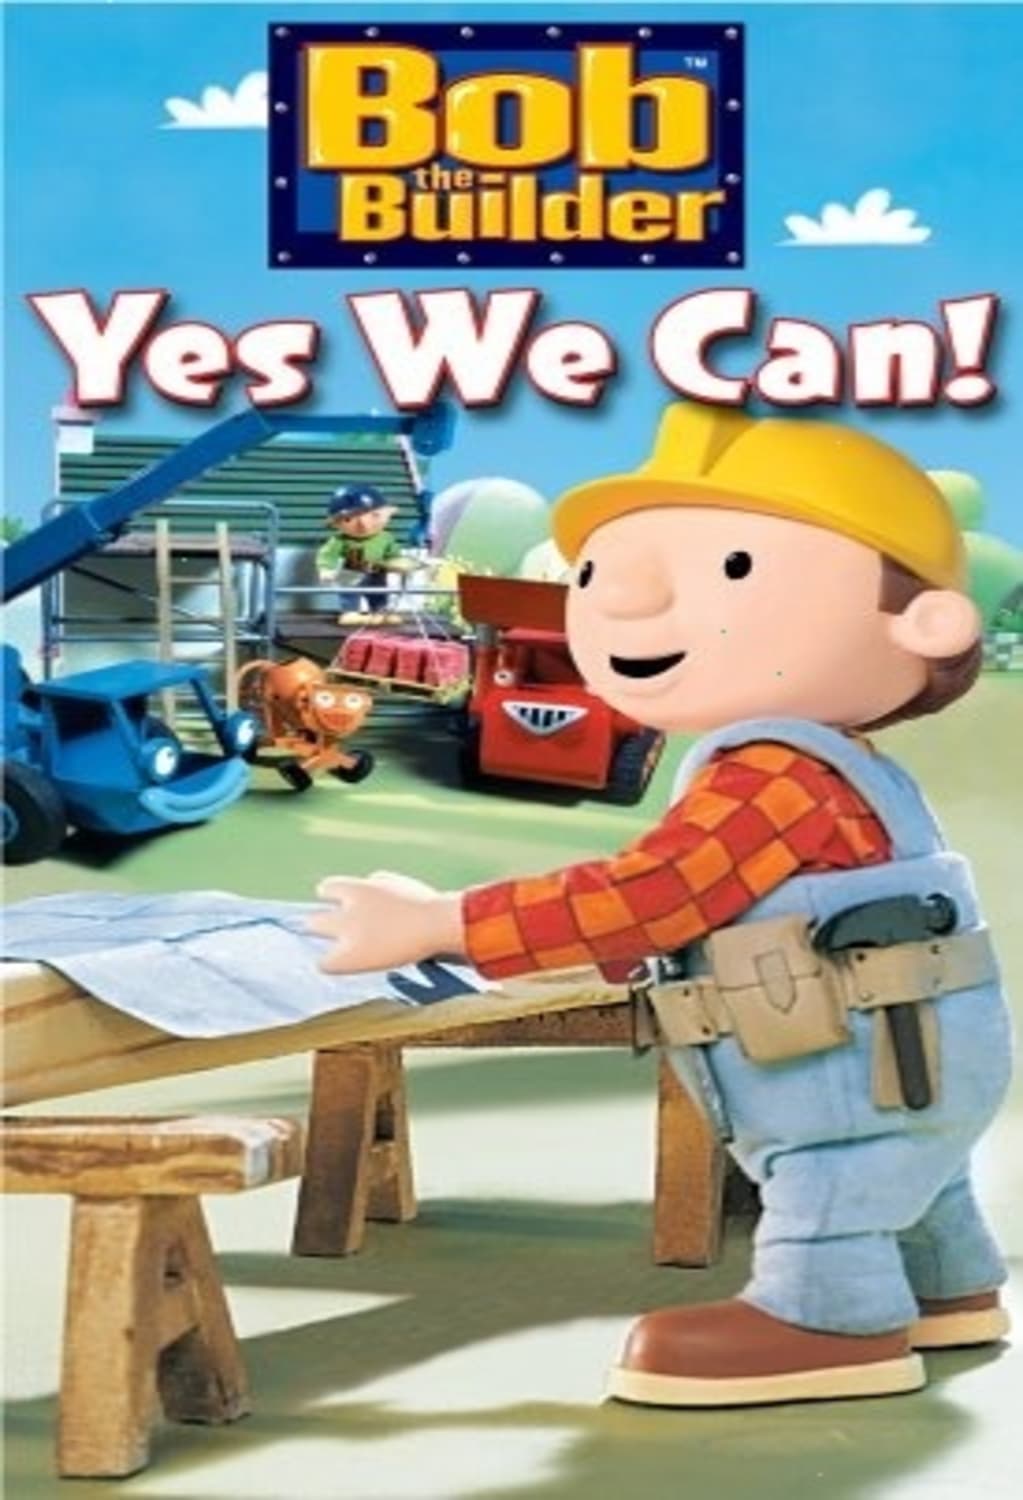 Bob the Builder: Yes We Can! (DVD) on MovieShack